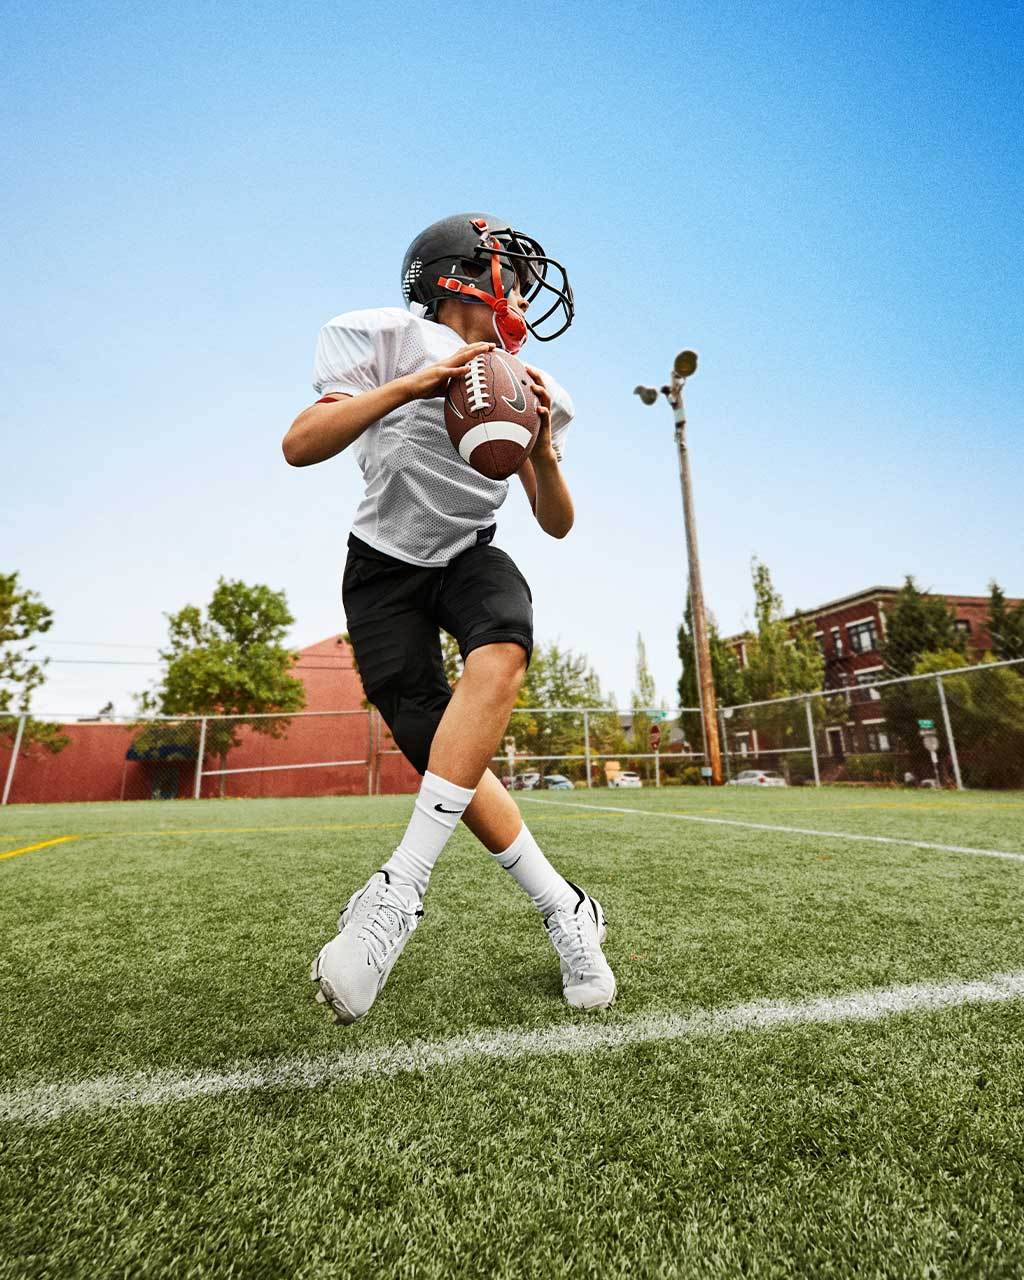 Find Football Leagues, Camps & Tournaments Near You